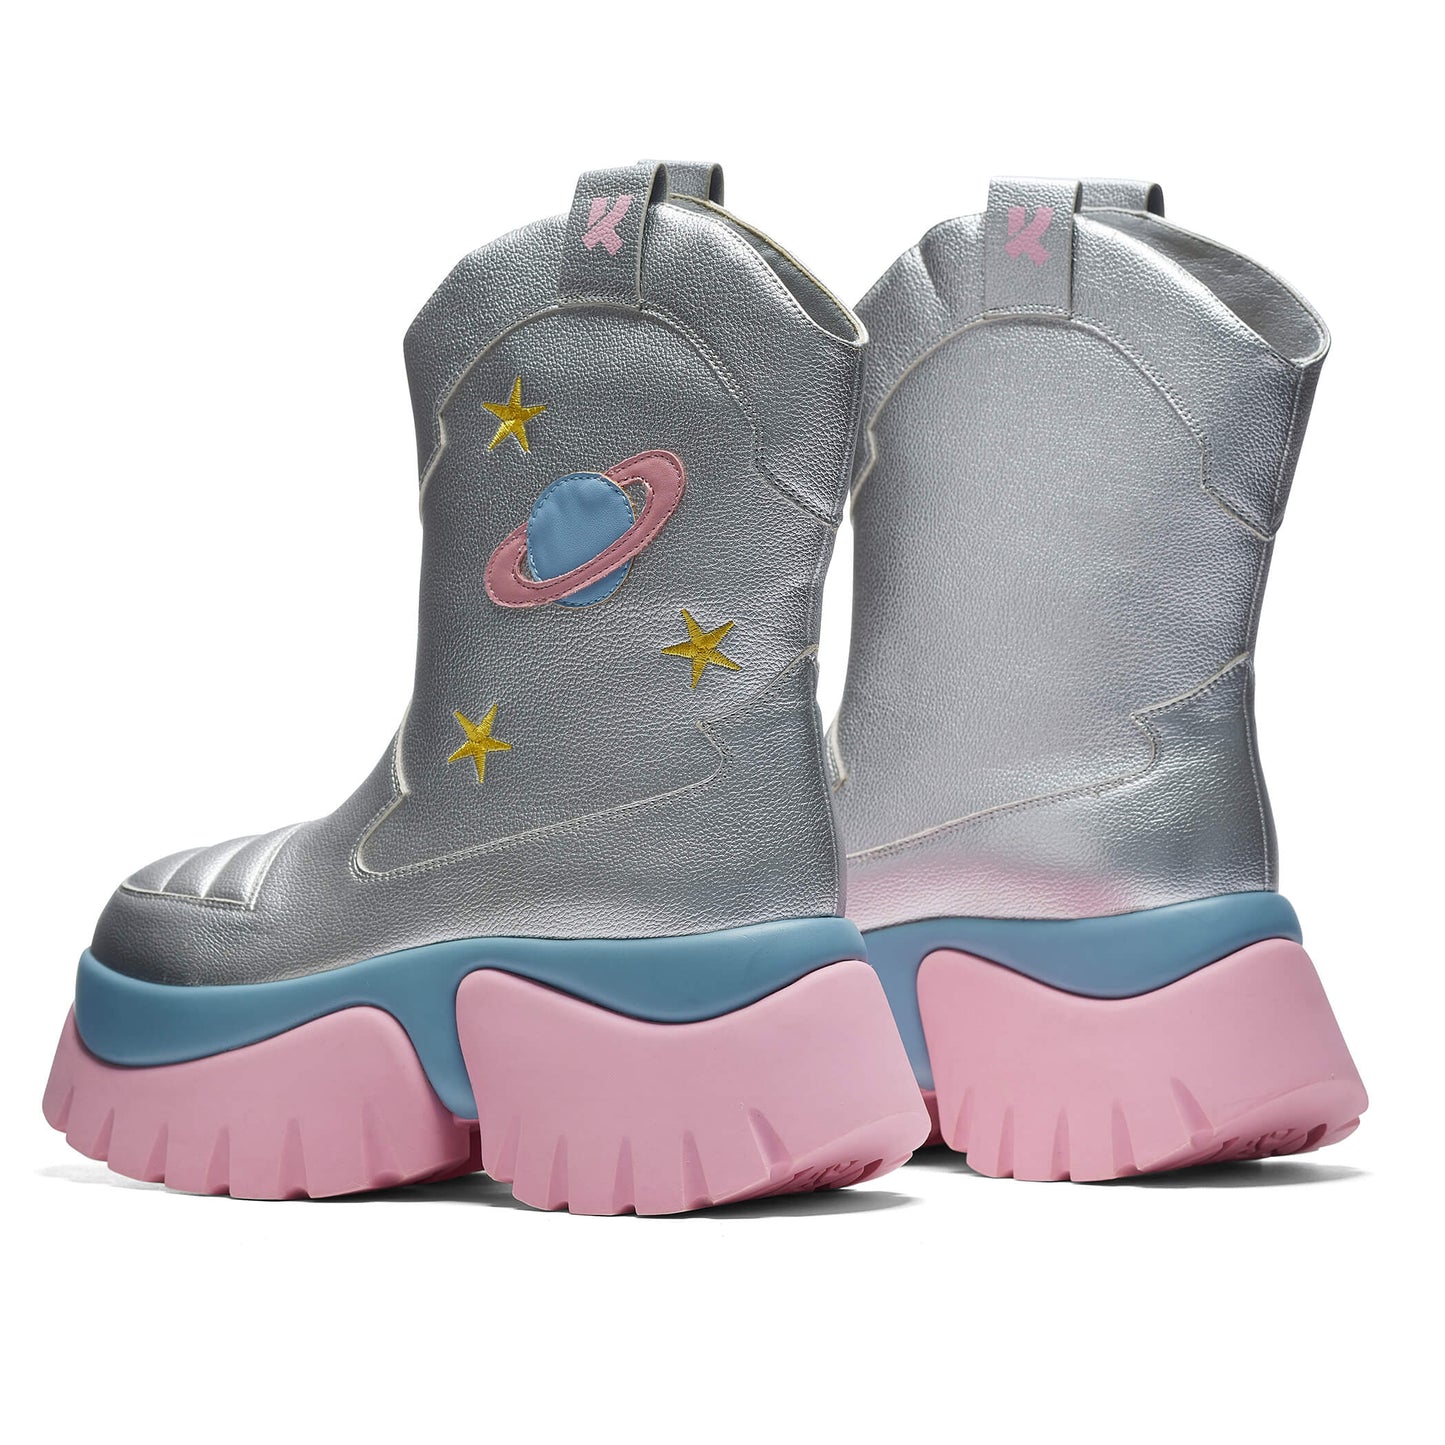 A Fairytale Galaxy Space Boots - Silver - Ankle Boots - KOI Footwear - Silver - Back View